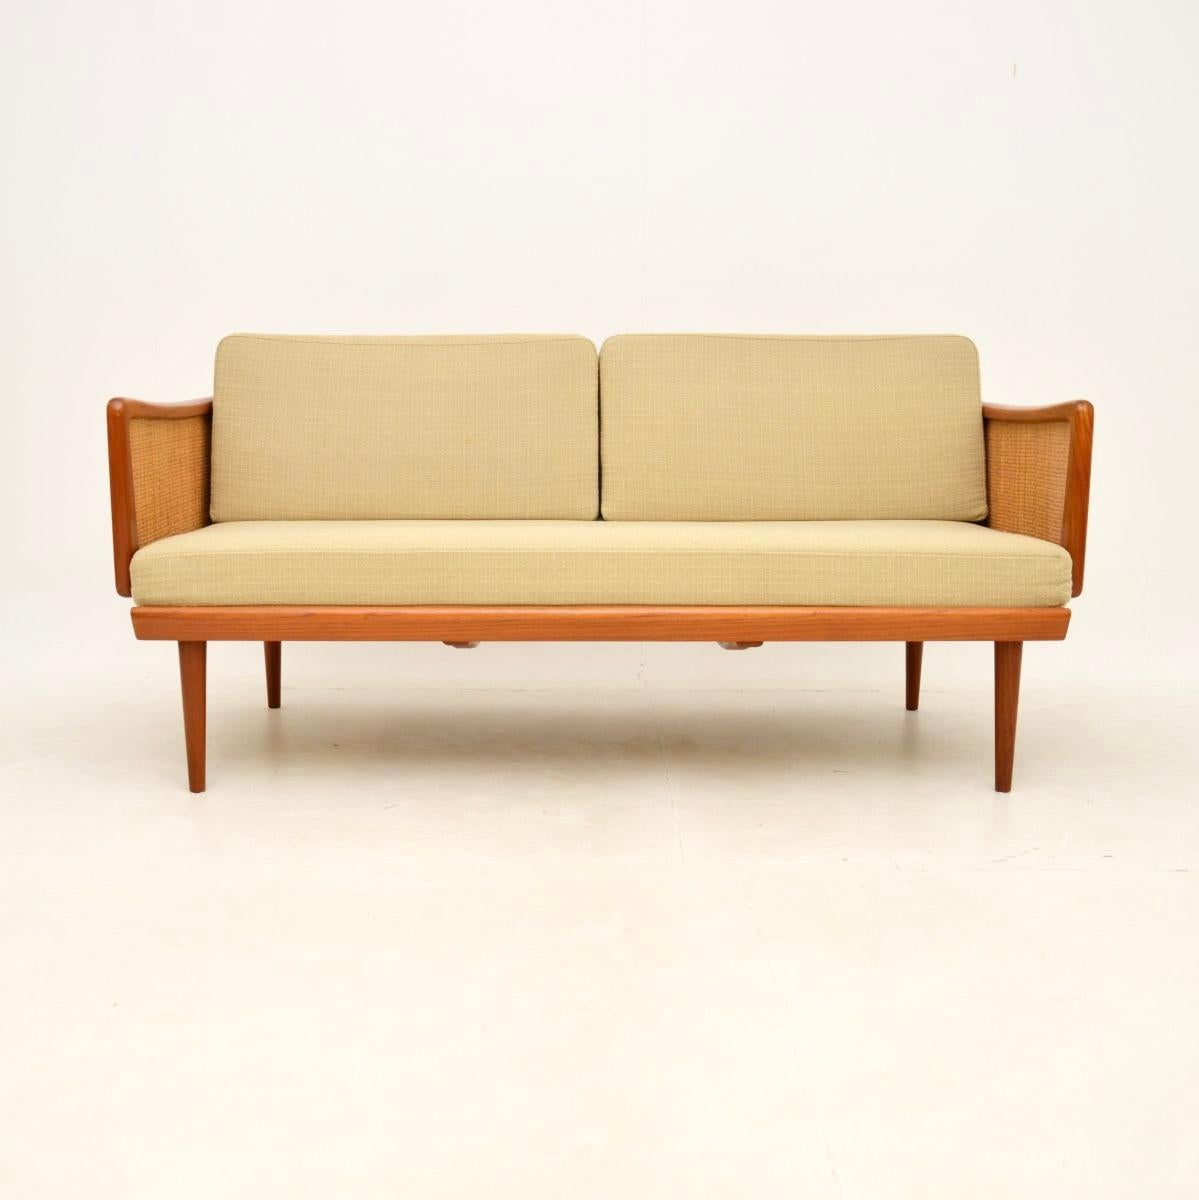 A stunning and very rare Danish vintage teak sofa bed by Peter Hvidt and Orla Mølgaard-Nielsen. This was made in Denmark by France and Son, it dates from the 1960’s.

It is of superb quality and is extremely comfortable with the original thick,